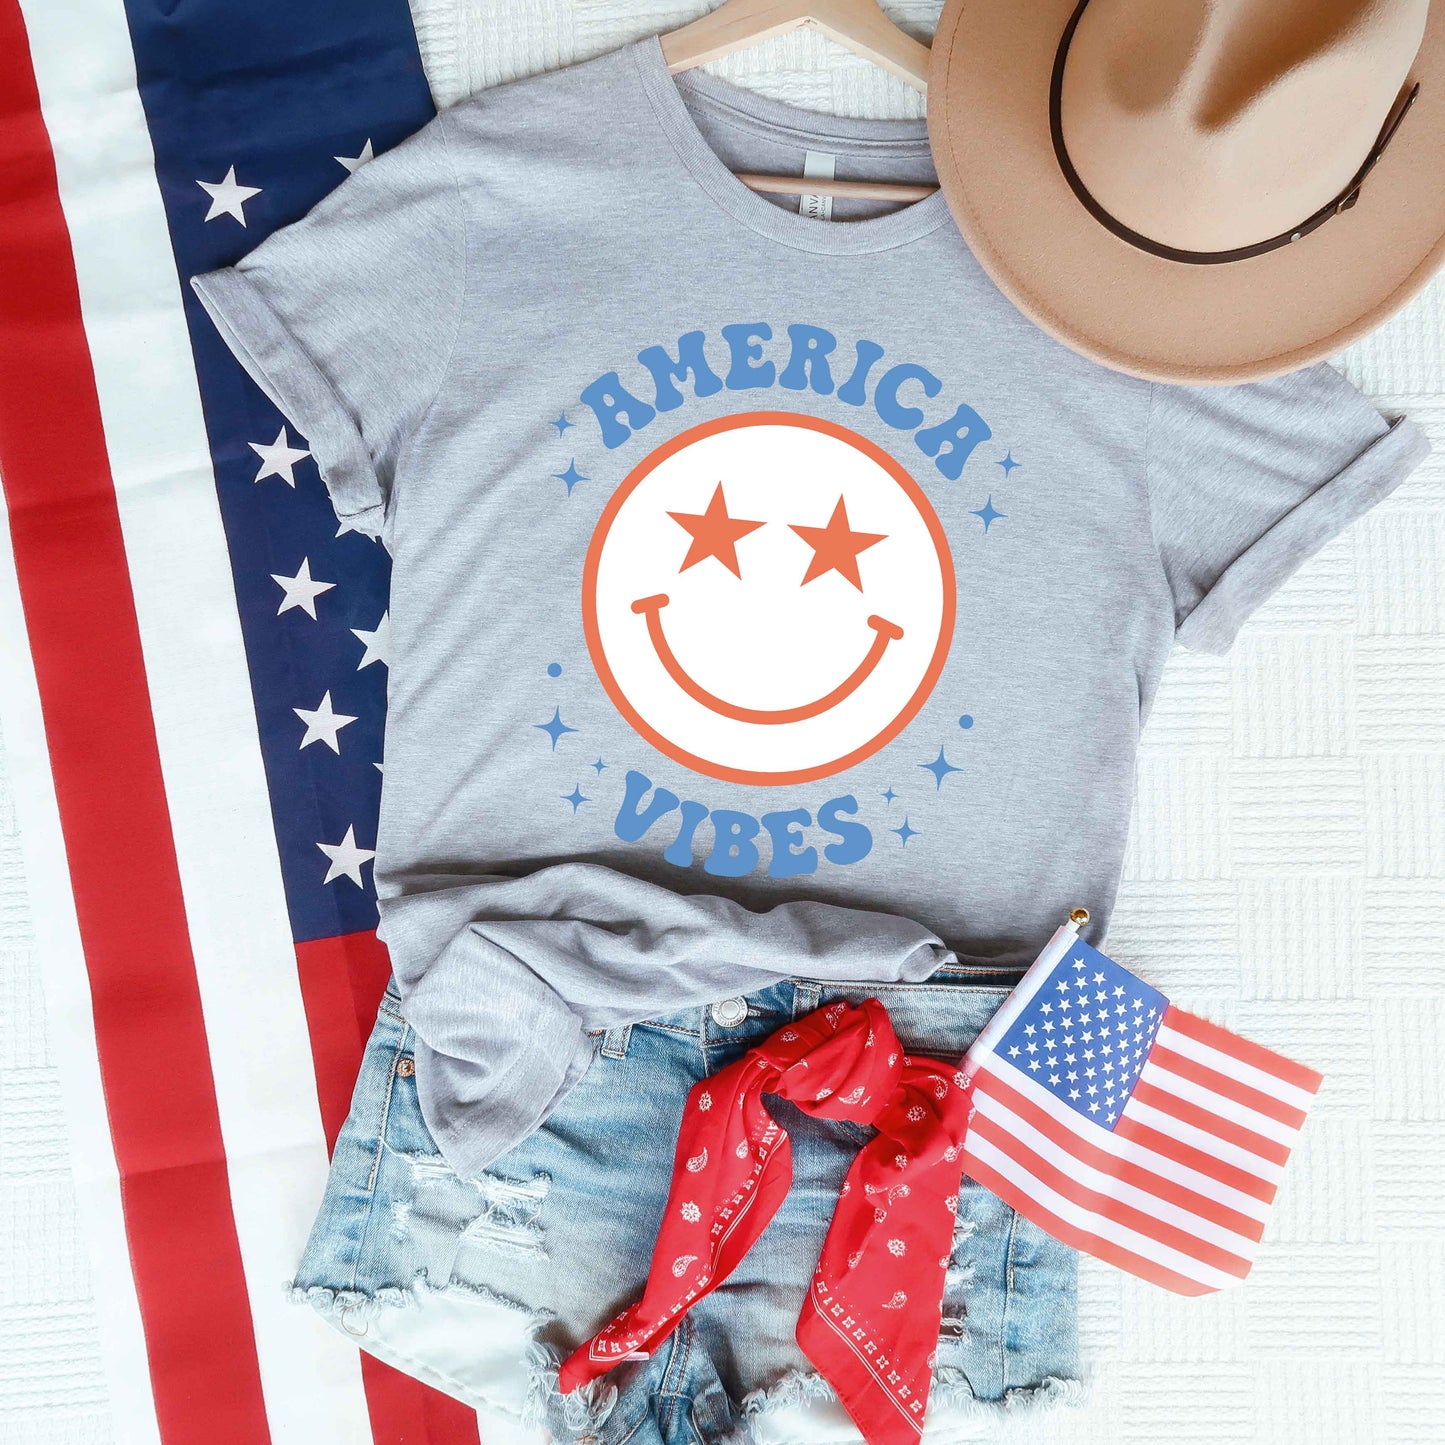 America Vibes Smiley Face | Short Sleeve Graphic Tee